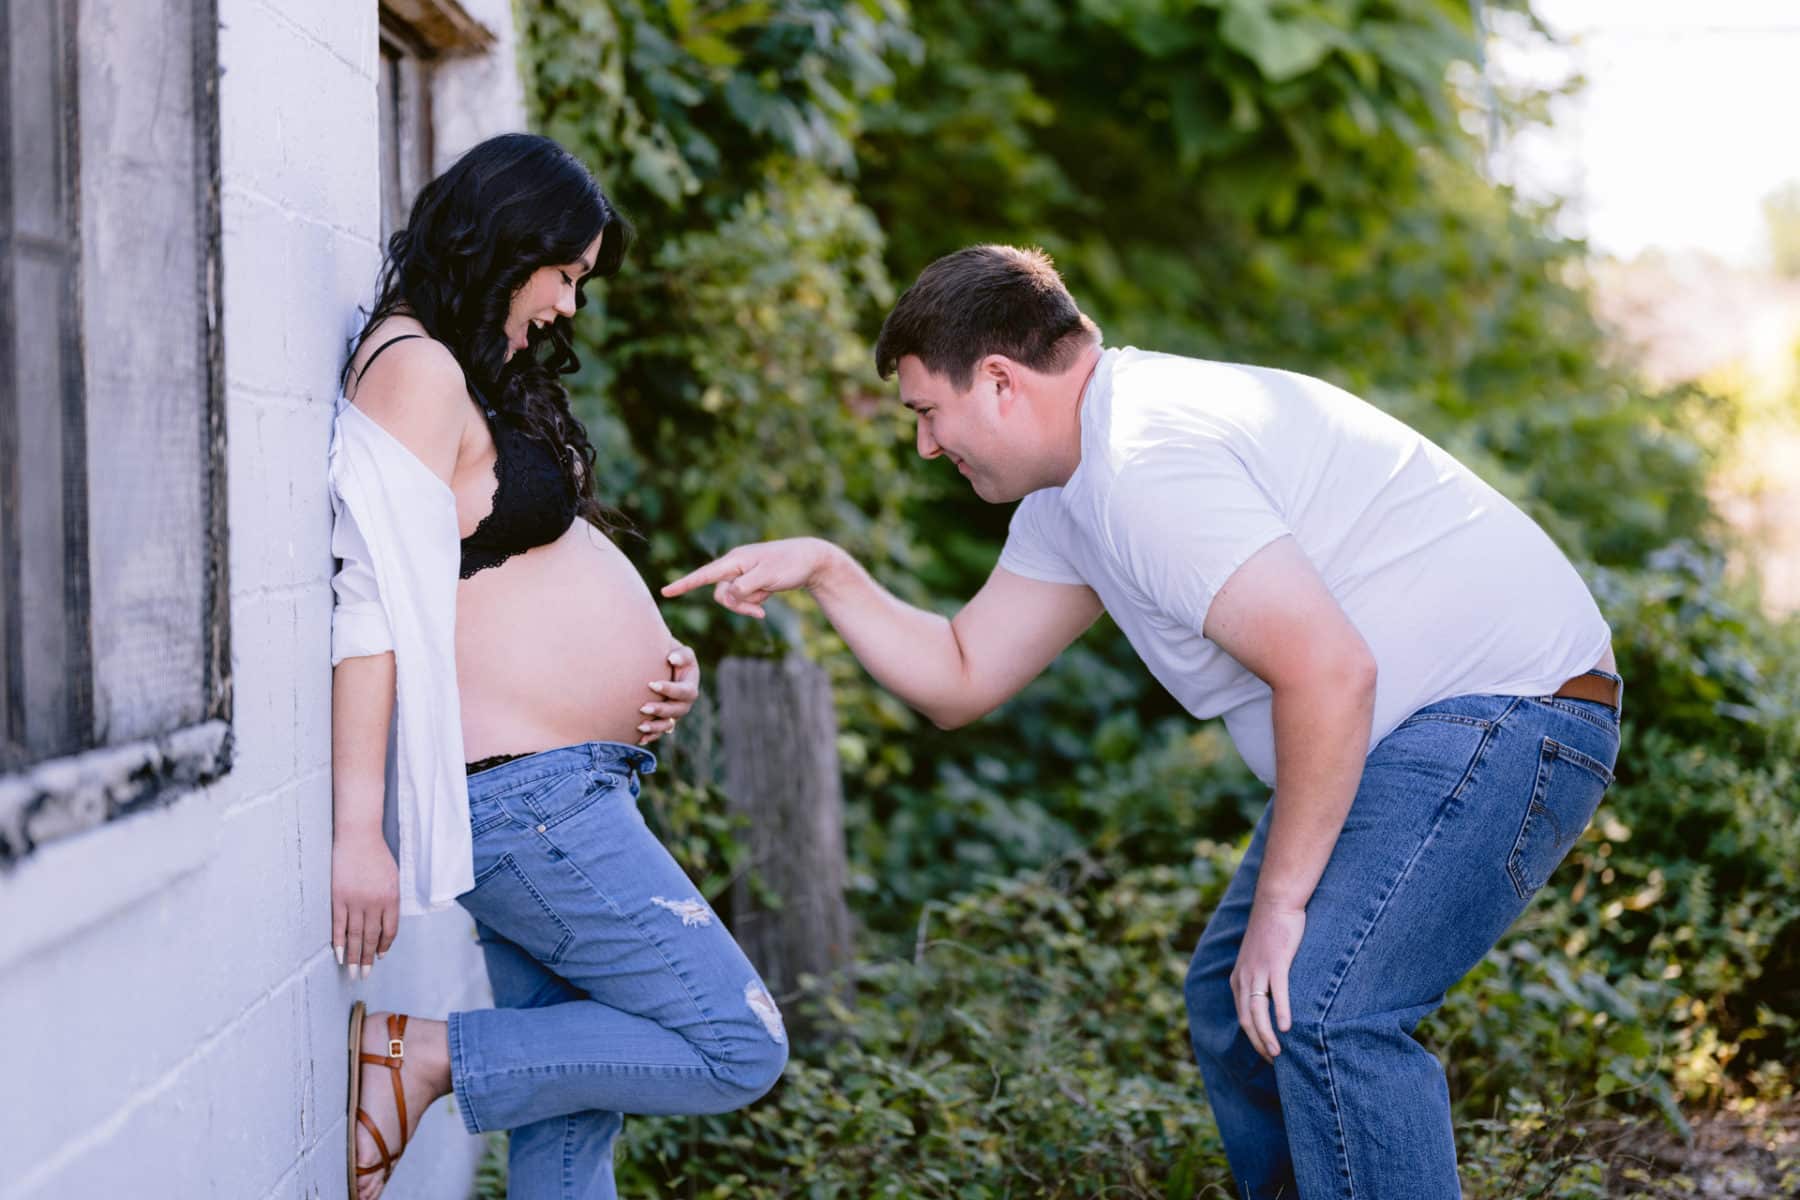 Dad to be poking wife's pregnant belly, outside, cute and playful.